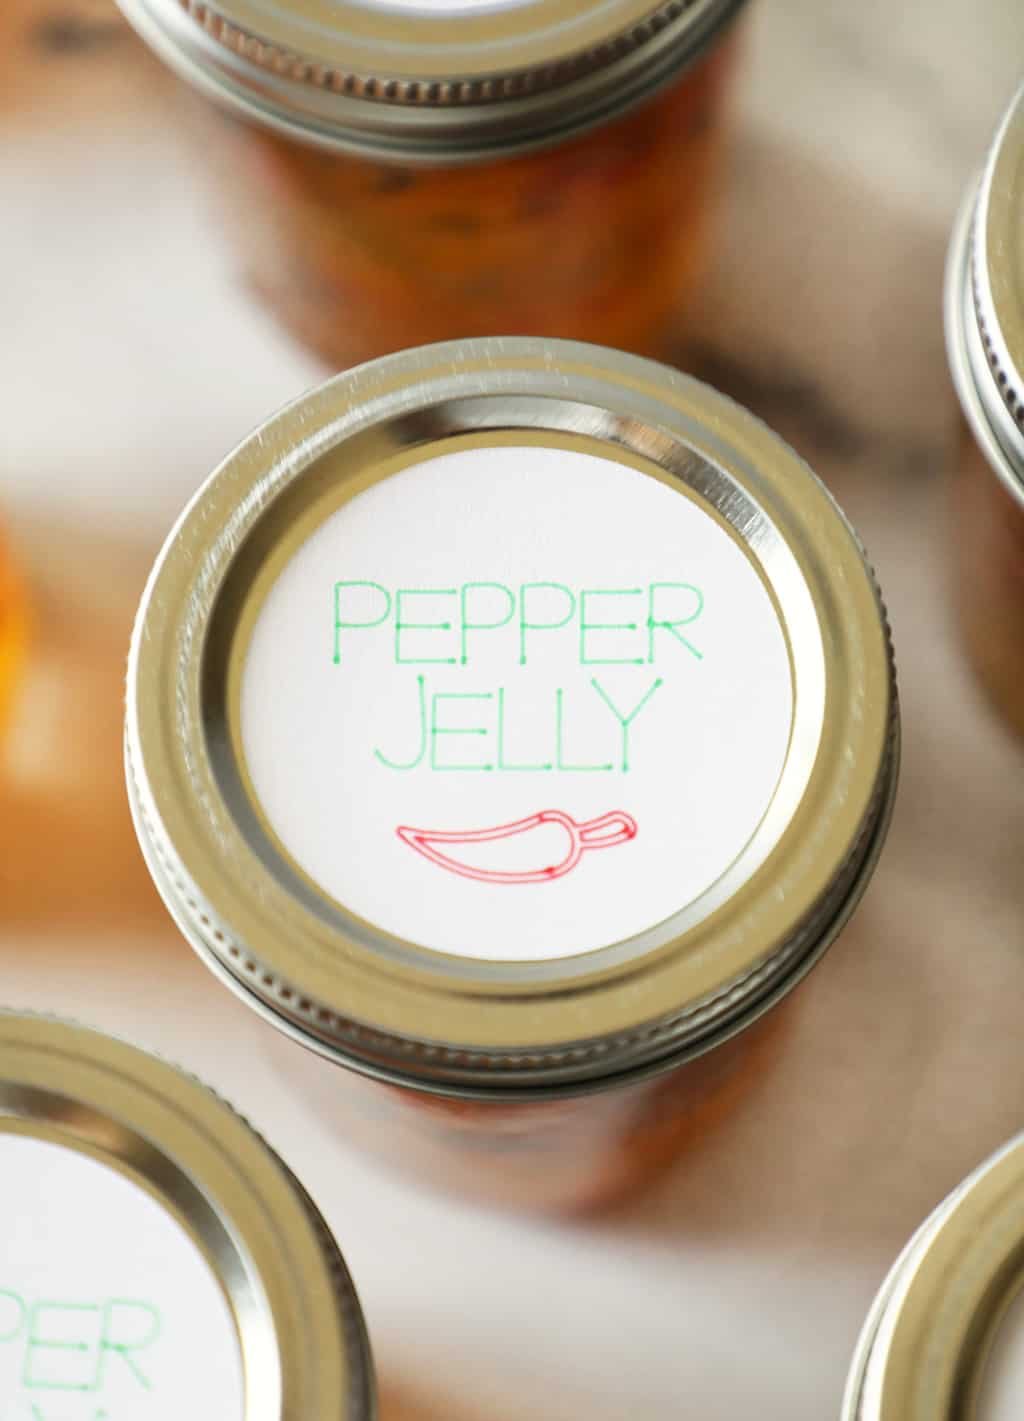 the top of a pint sized jar with a label that says "pepper jelly"